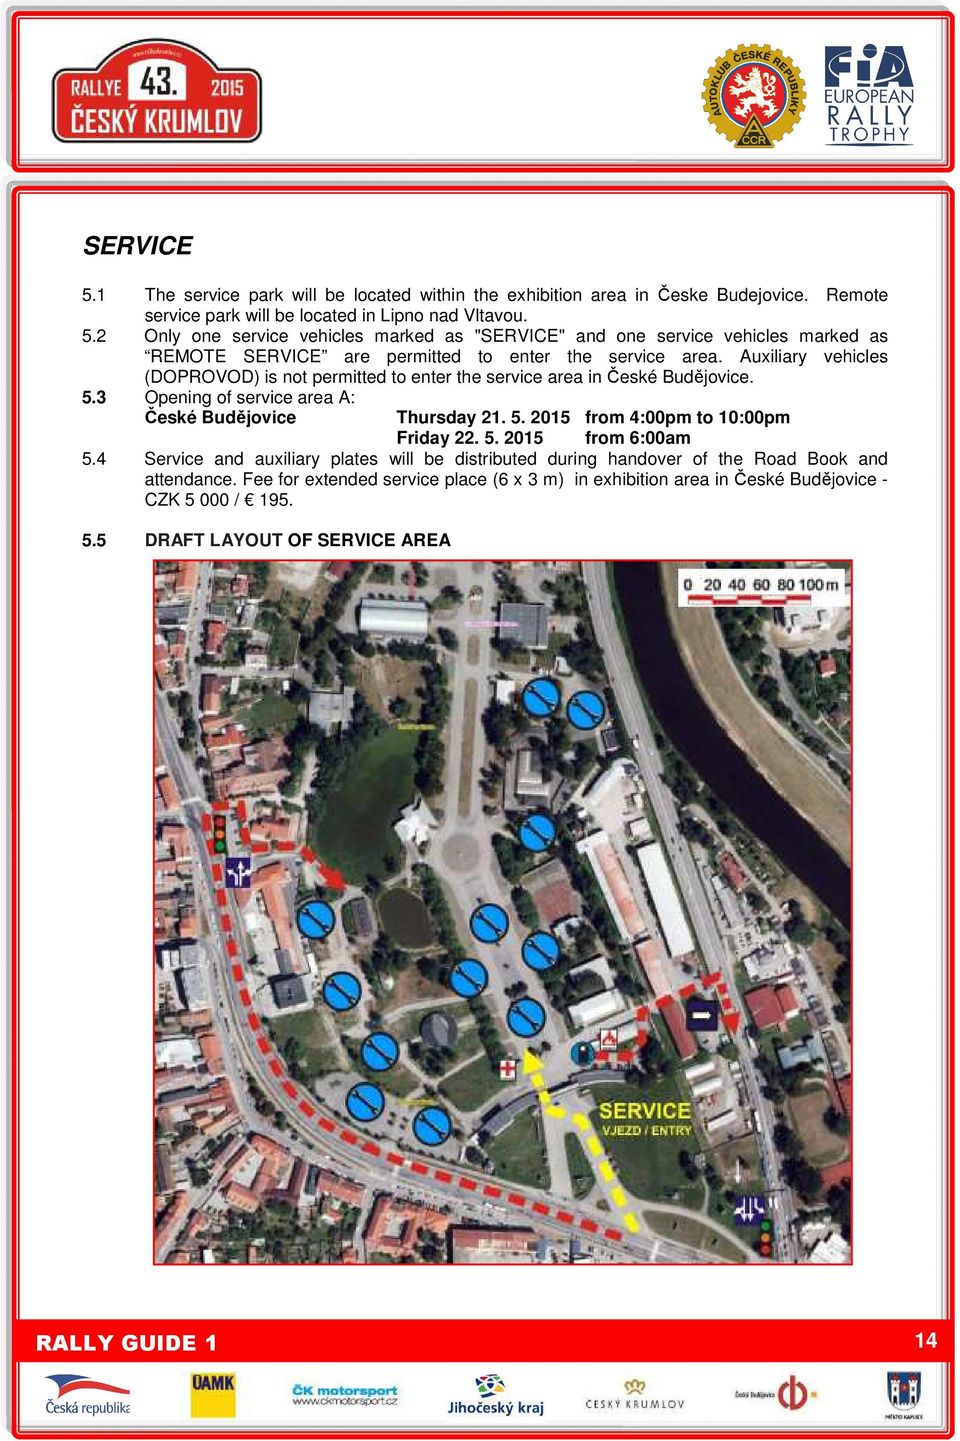 5. 2015 from 6:00am 5.4 Service and auxiliary plates will be distributed during handover of the Road Book and attendance.